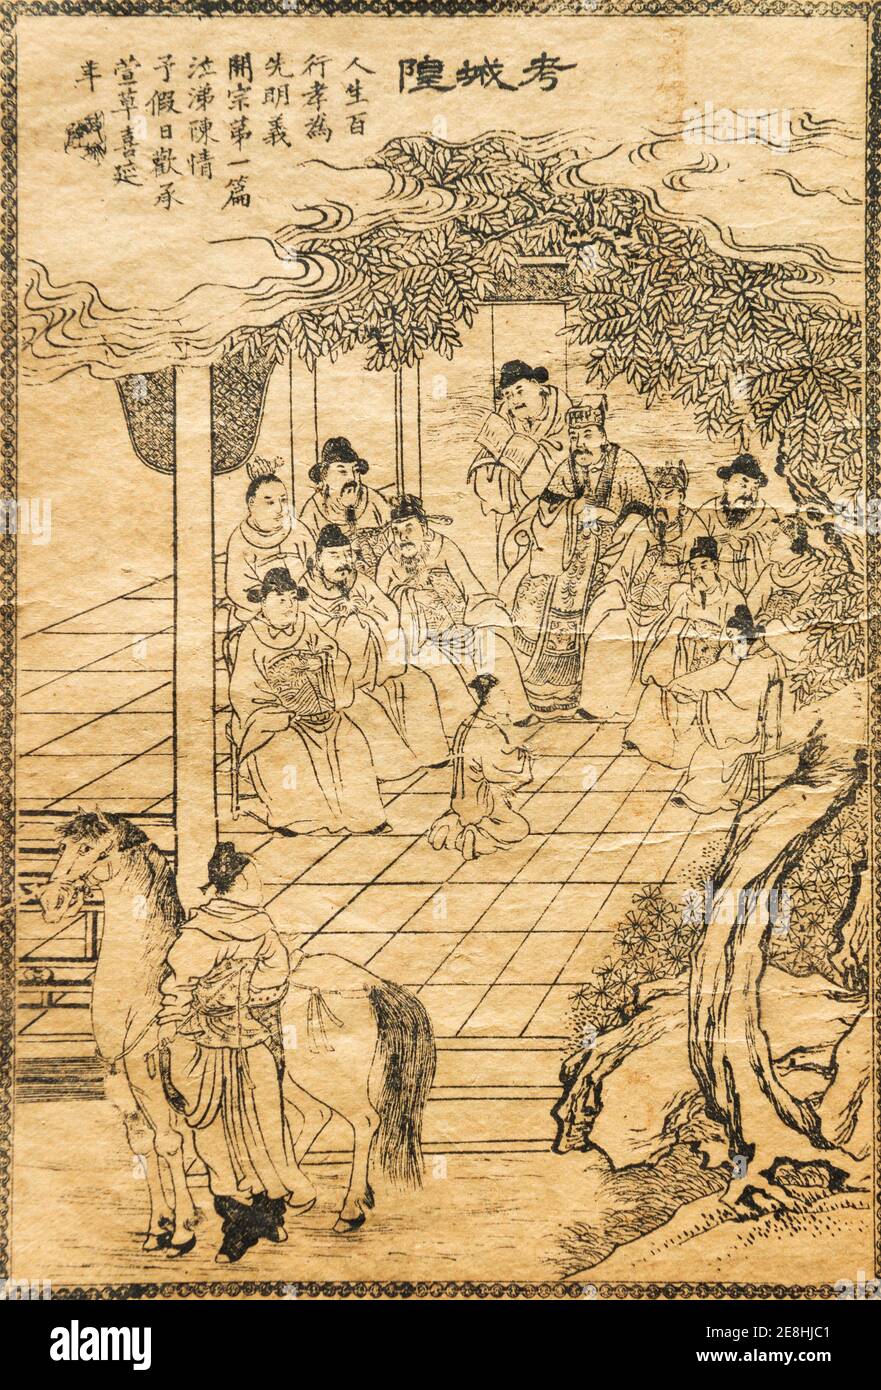 An illustration of a scene from the short story 'Kao Cheng Huang' collected in Strange Tales from a Chinese Studio(Liaozhai Zhiyi) by Pu Songling. Stock Photo